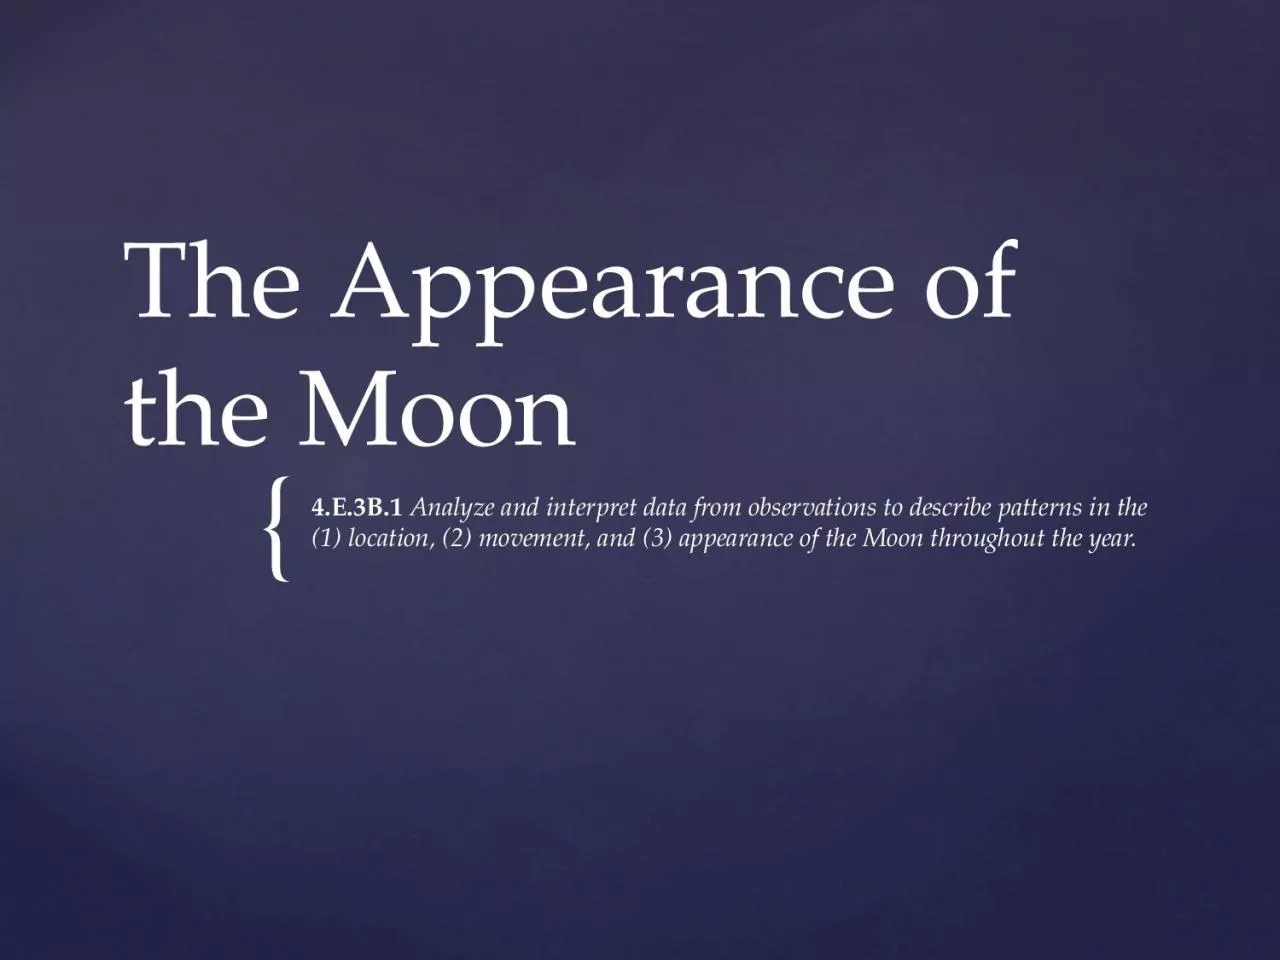 The Appearance of the Moon